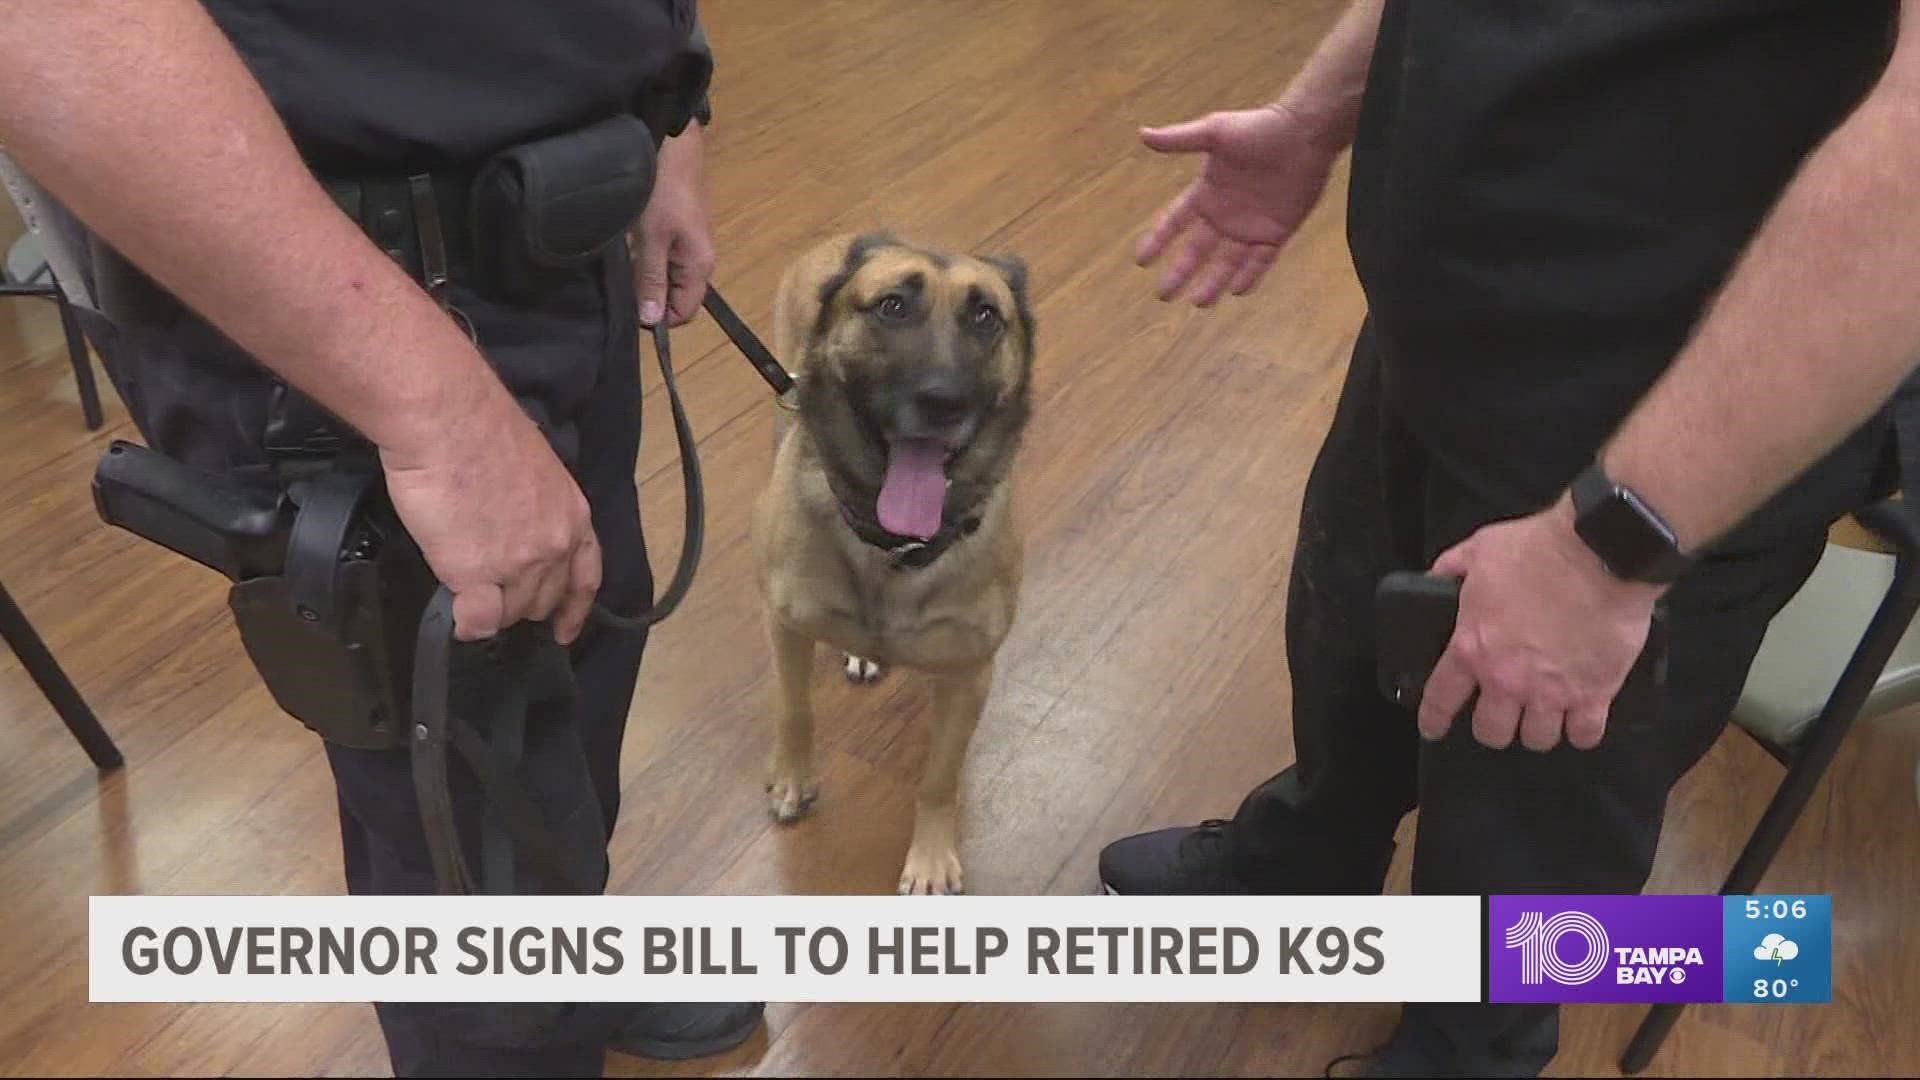 The new law will help ease the cost of vet care for aging, retired K-9s, allowing their owners and caretakers to afford their care.